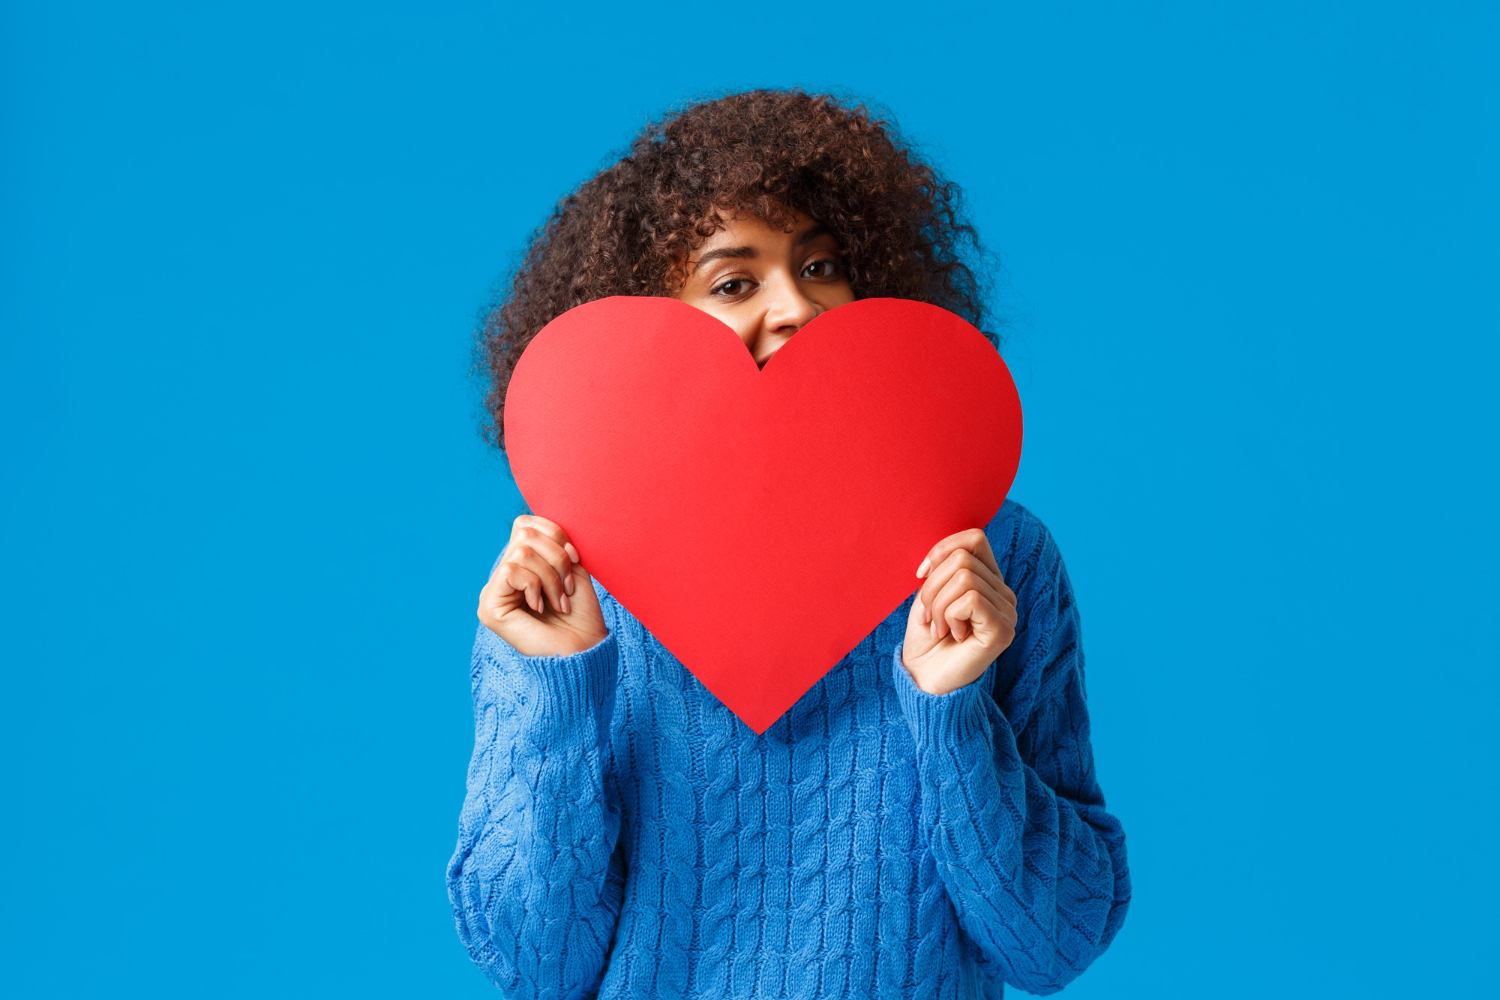 cute-and-lovely-flushed-african-american-girl-with-afro-haircut-in-sweater-hiding-face-behind-big-red-heart-and-peeking-joyfully-blue-wall